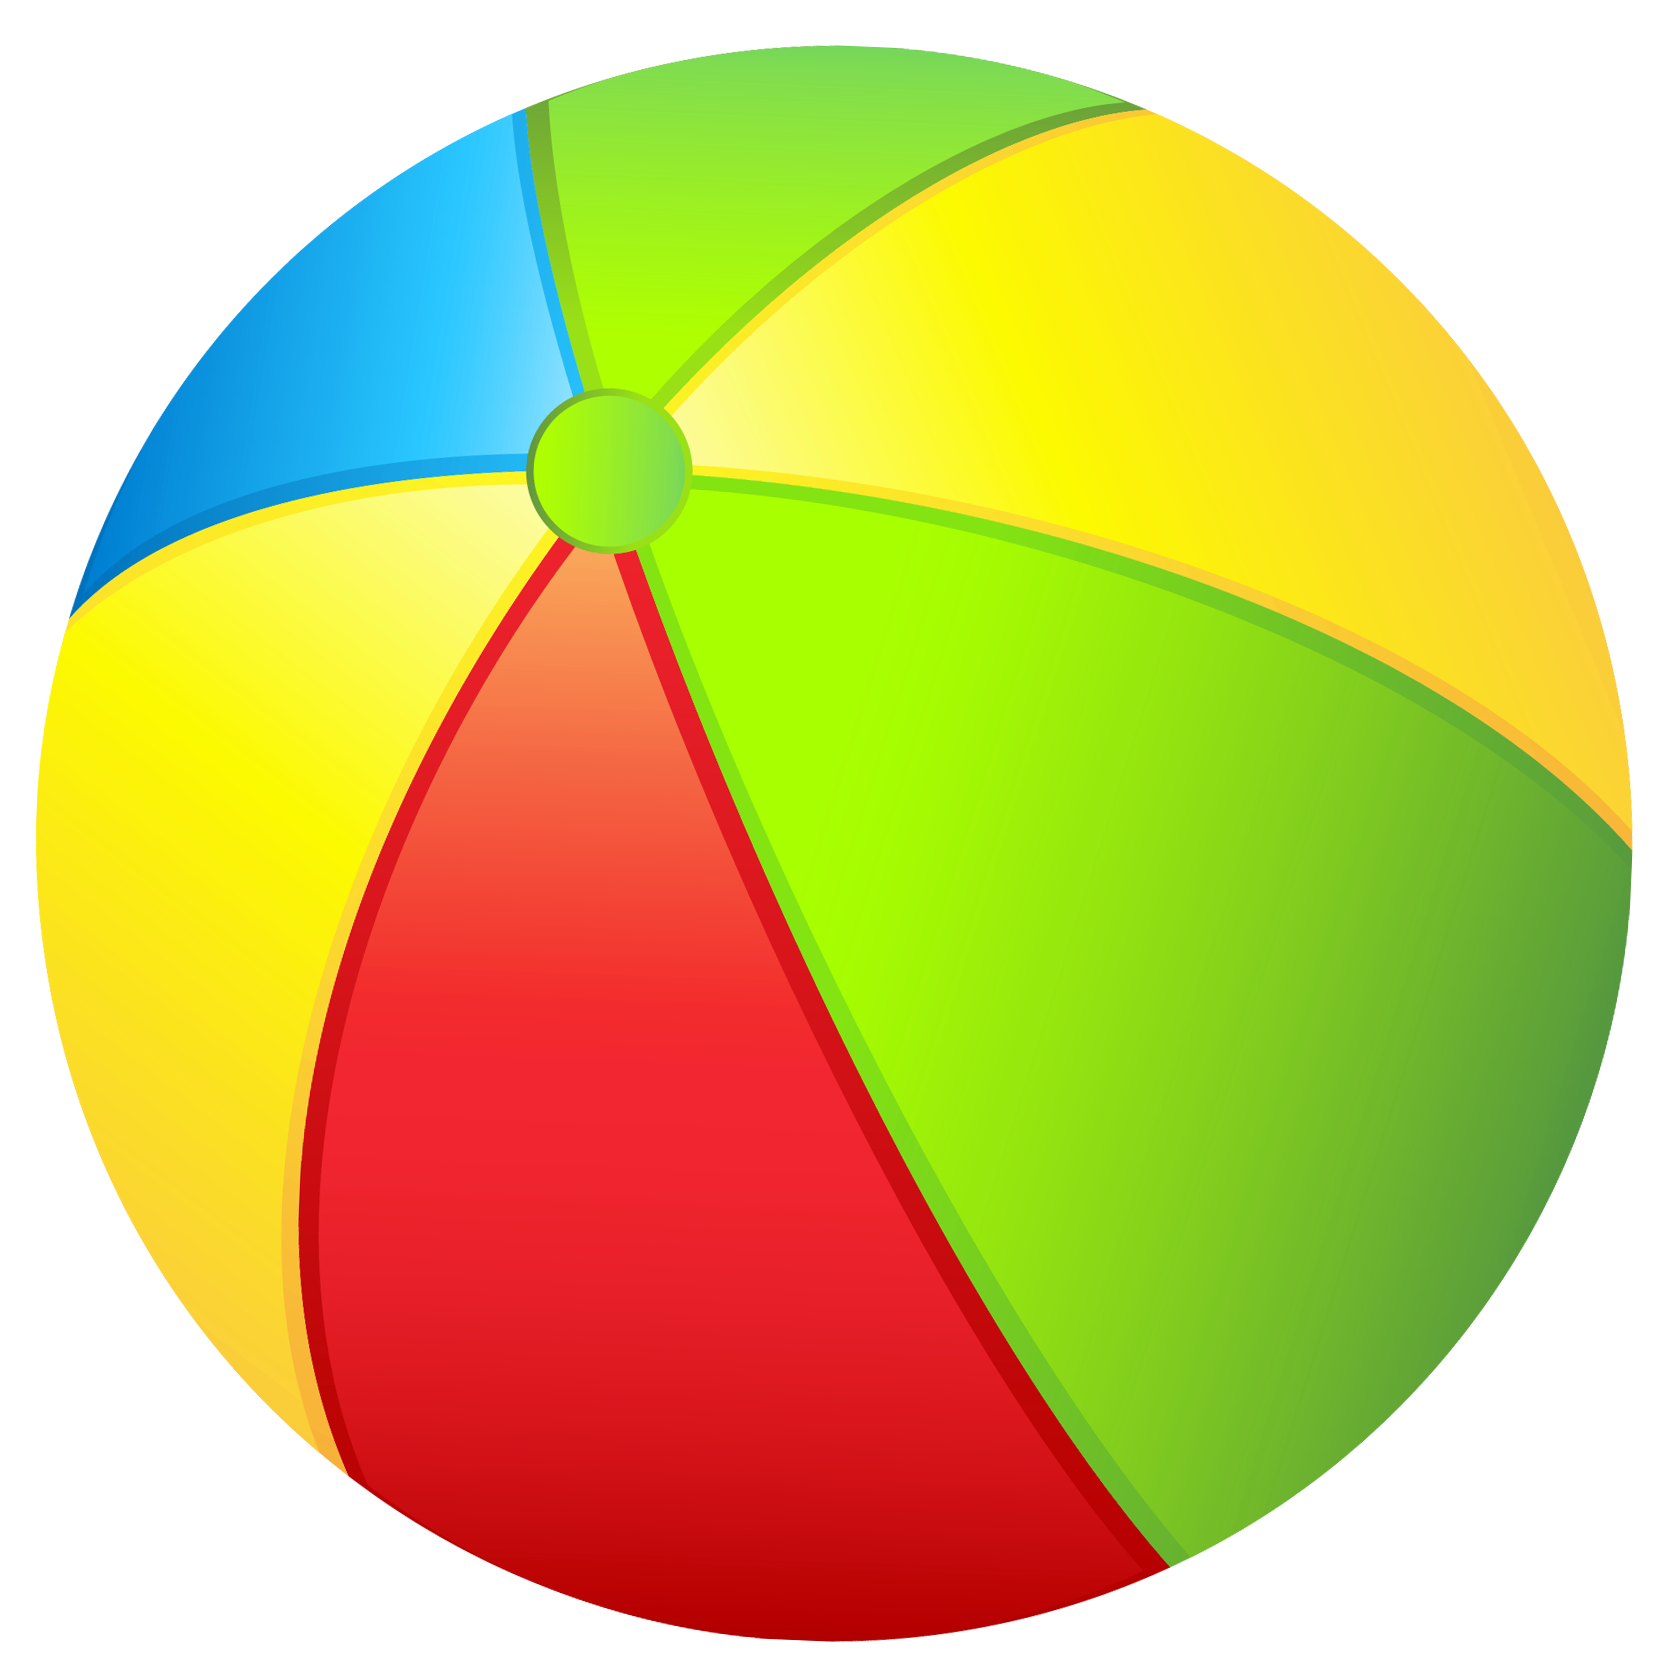 Transparent Beach Ball PNG Clipart​ | Gallery Yopriceville - High-Quality  Free Images and Transparent PNG Clipart